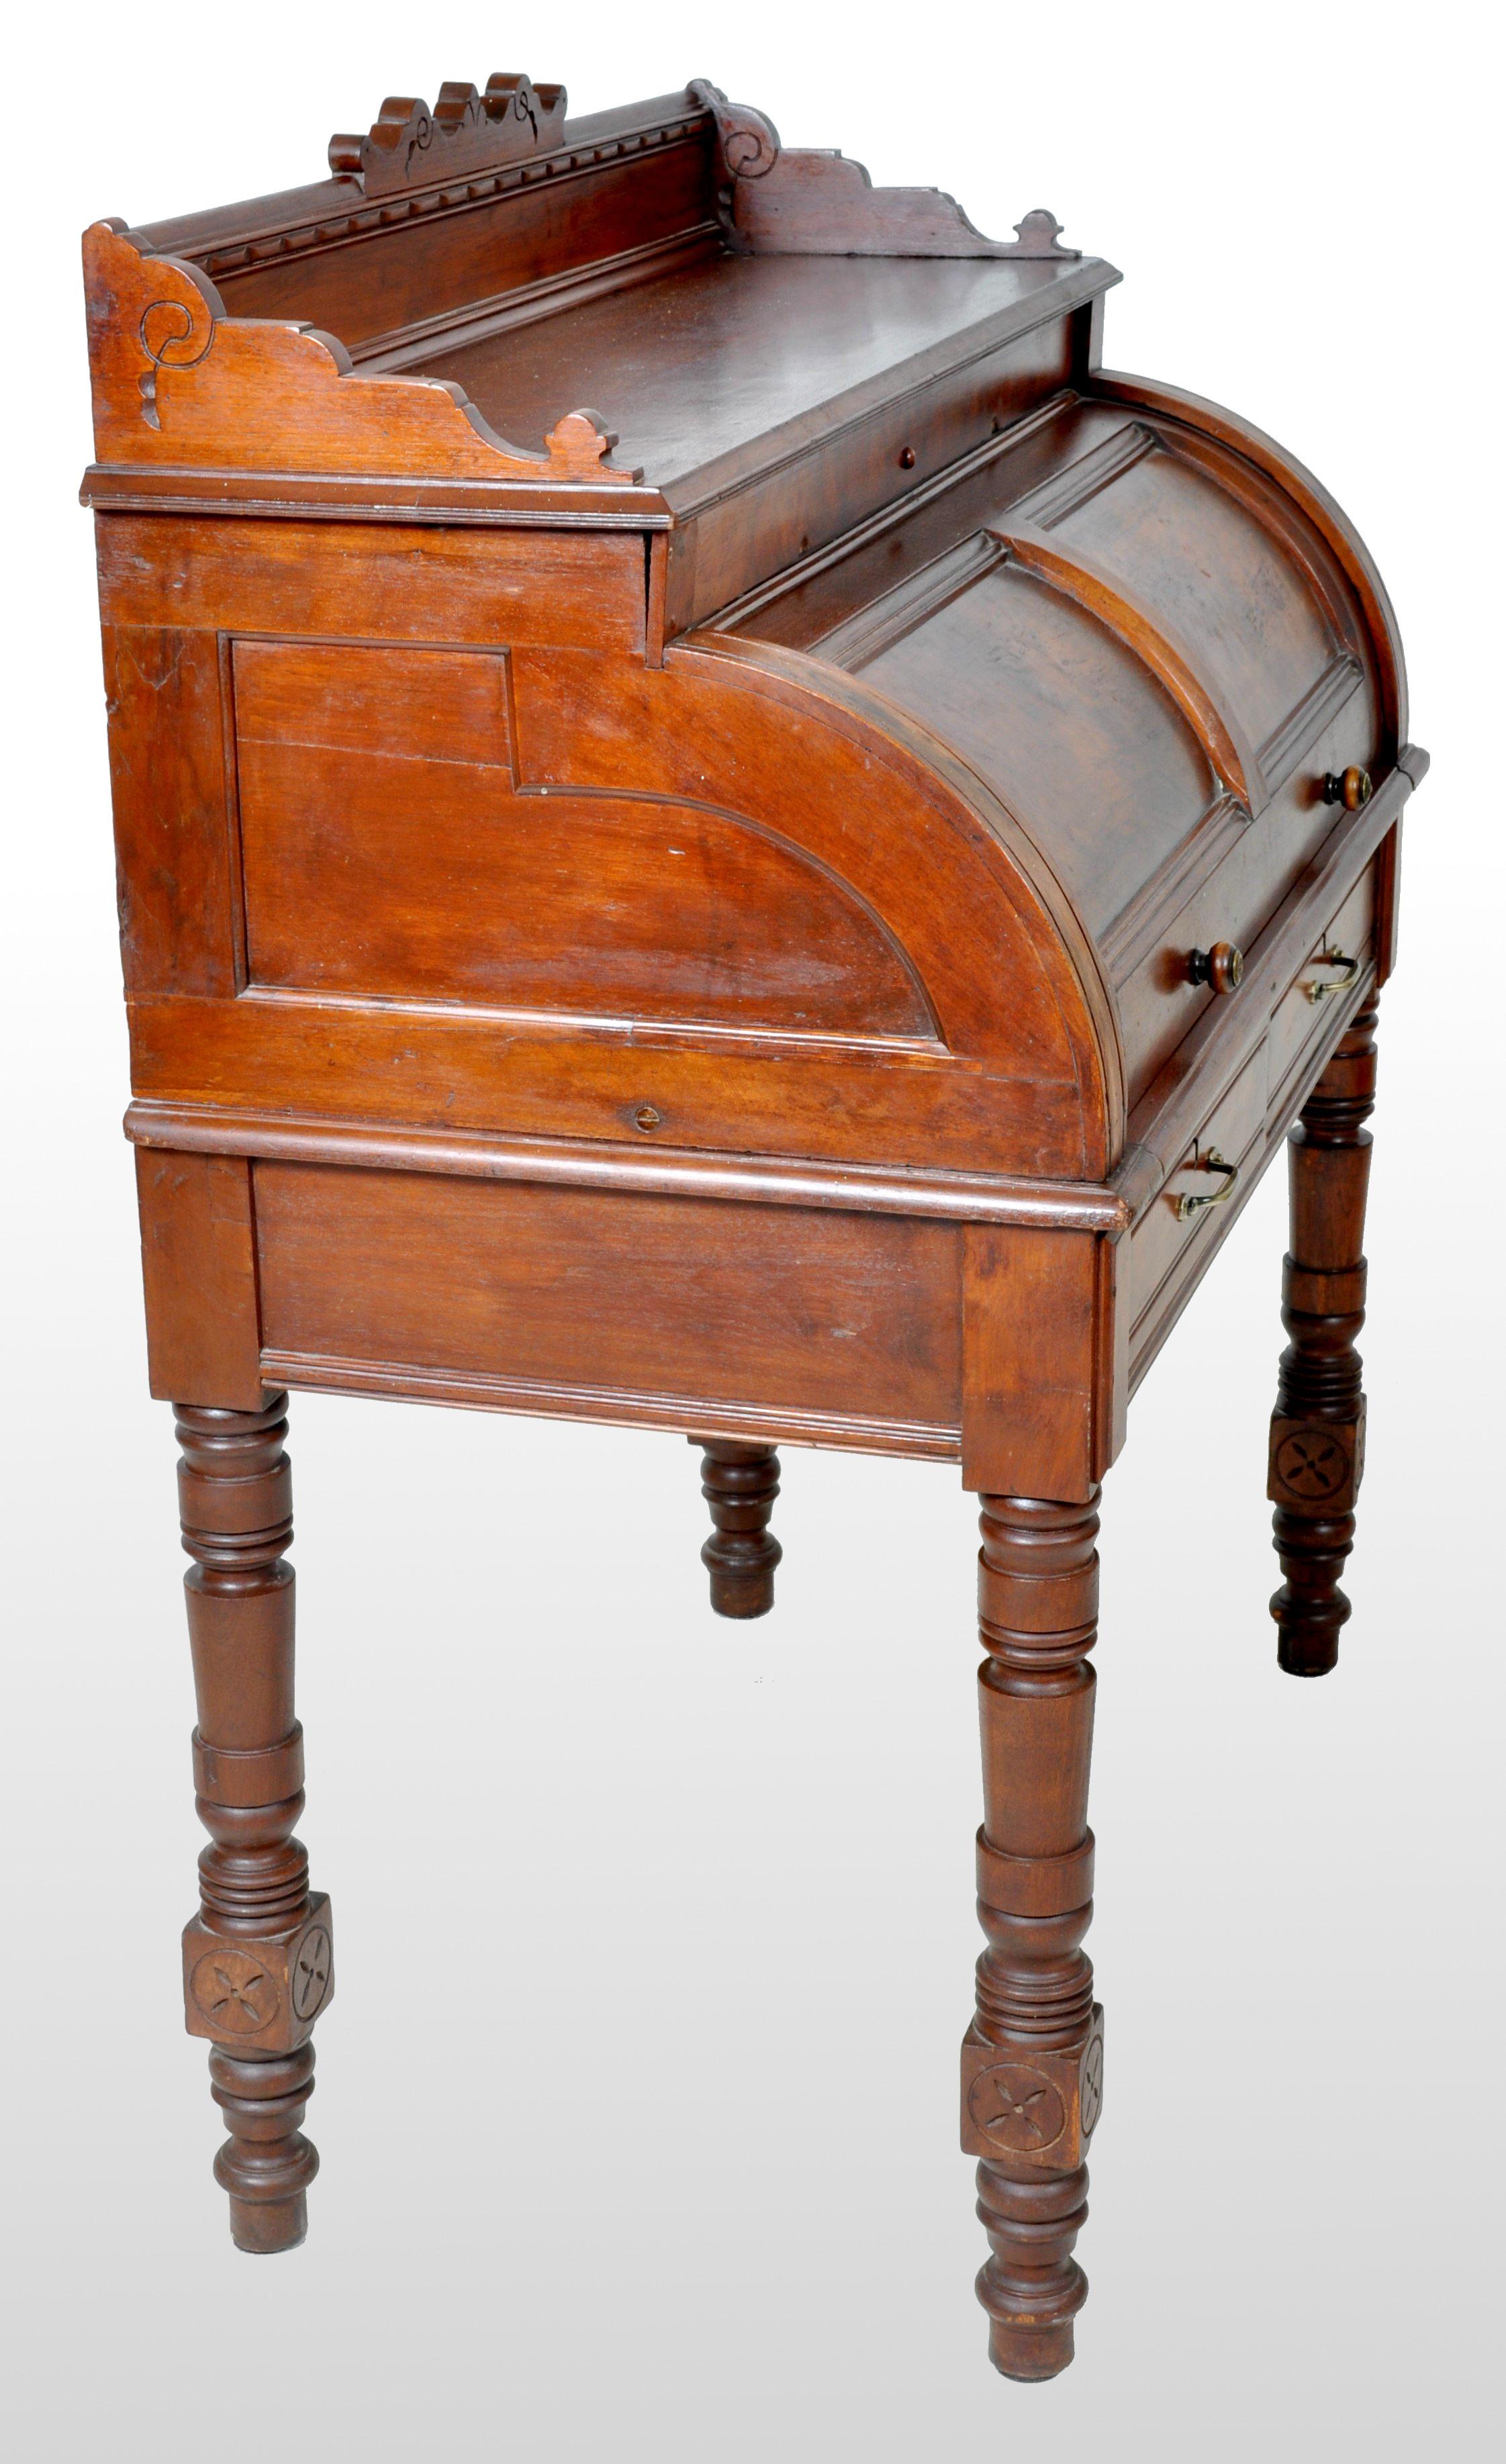 Antique American Eastlake walnut cylinder roll-top desk, 1875. The desk having a carved gallery, below is a cylinder roll-top having burl walnut panels. Inside is a fitted interior with a pull-out writing surface, below a pair of drawers with brass